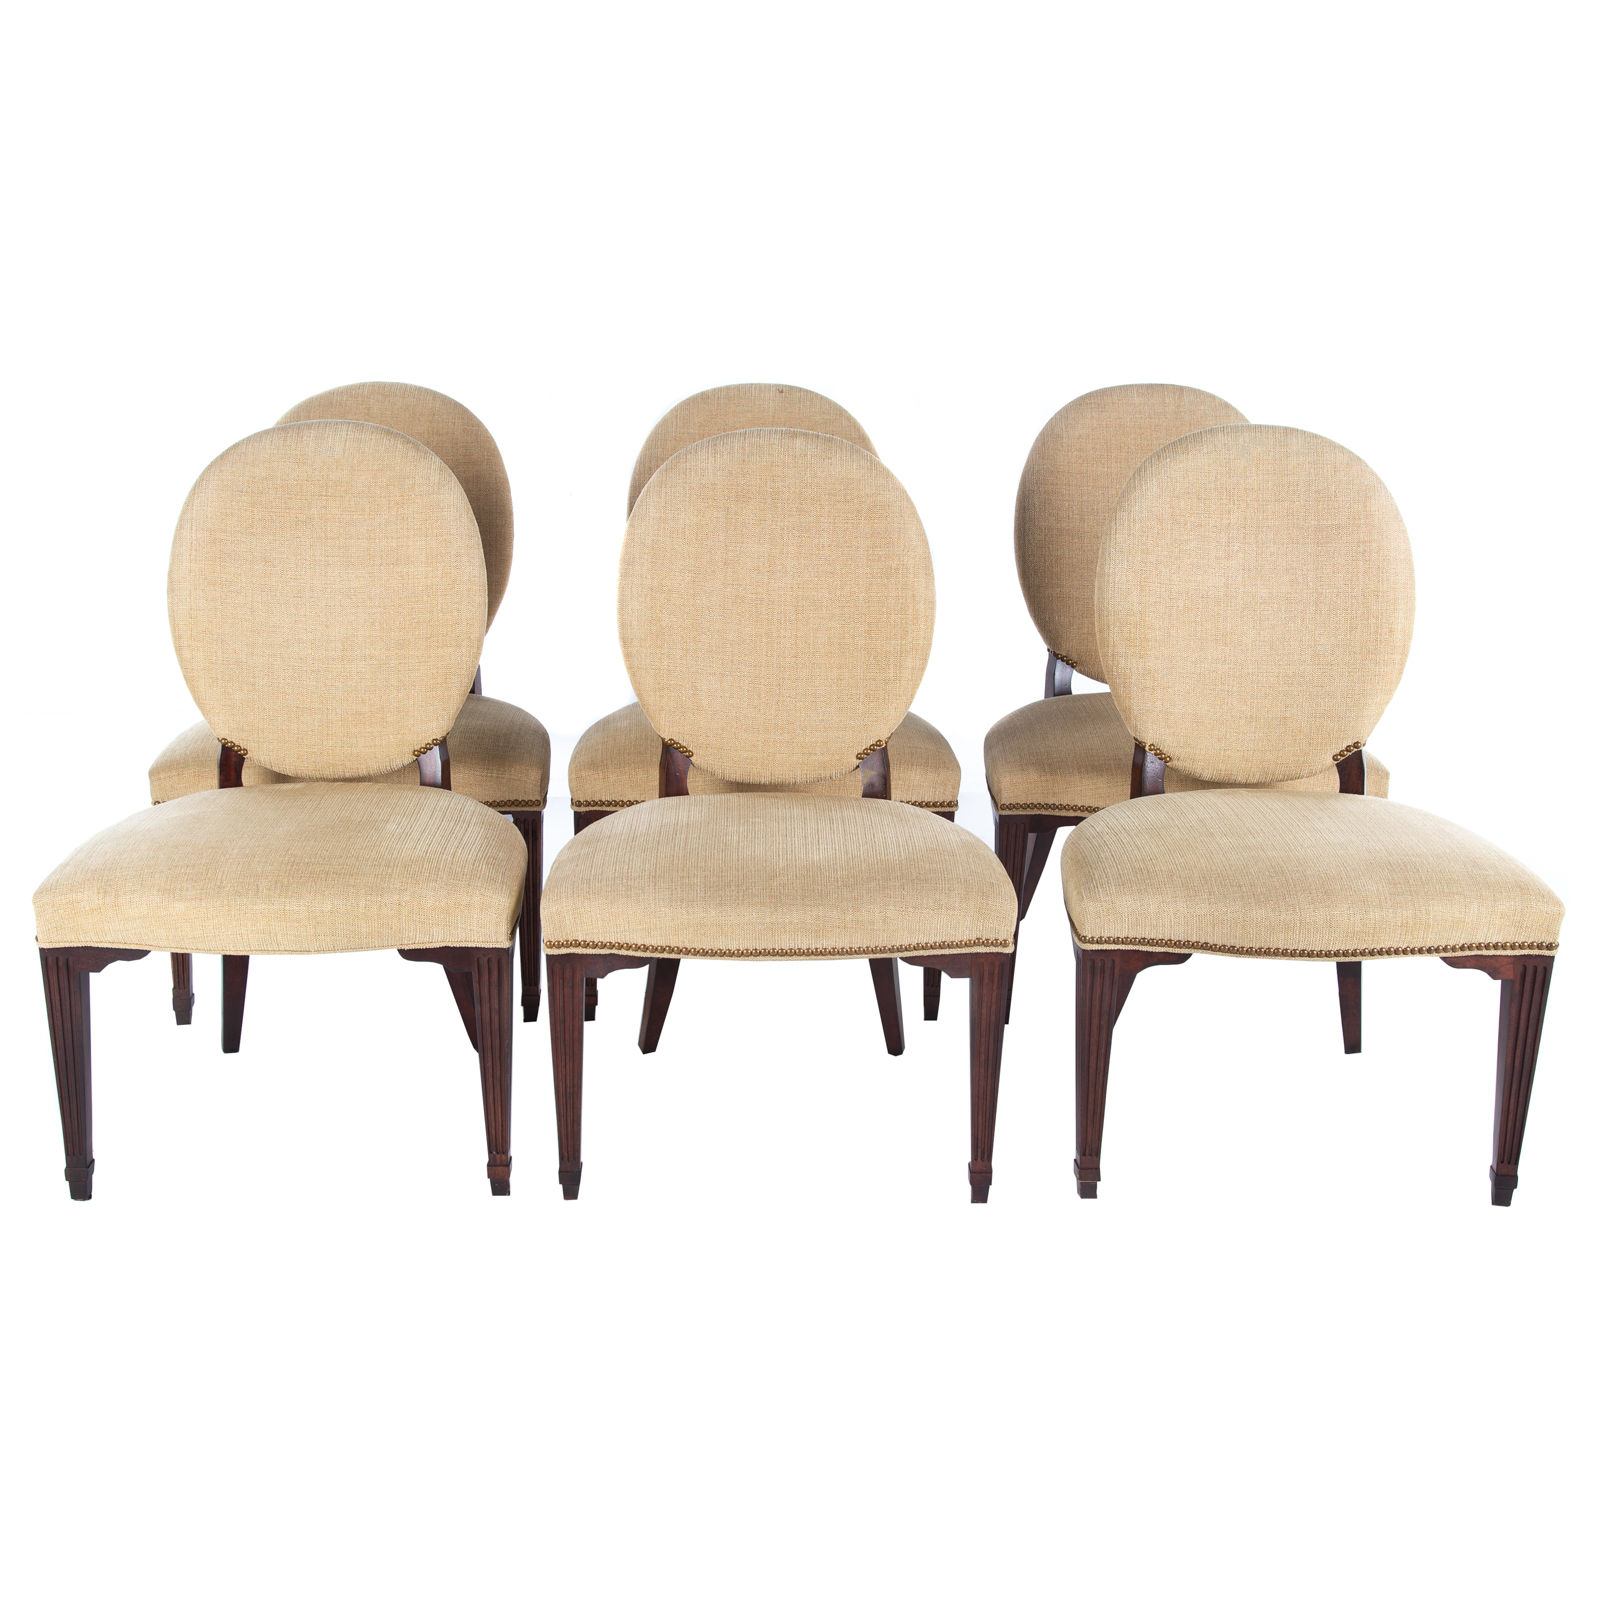 SET OF SIX HICKORY CHAIR UPHOLSTERED 36940f